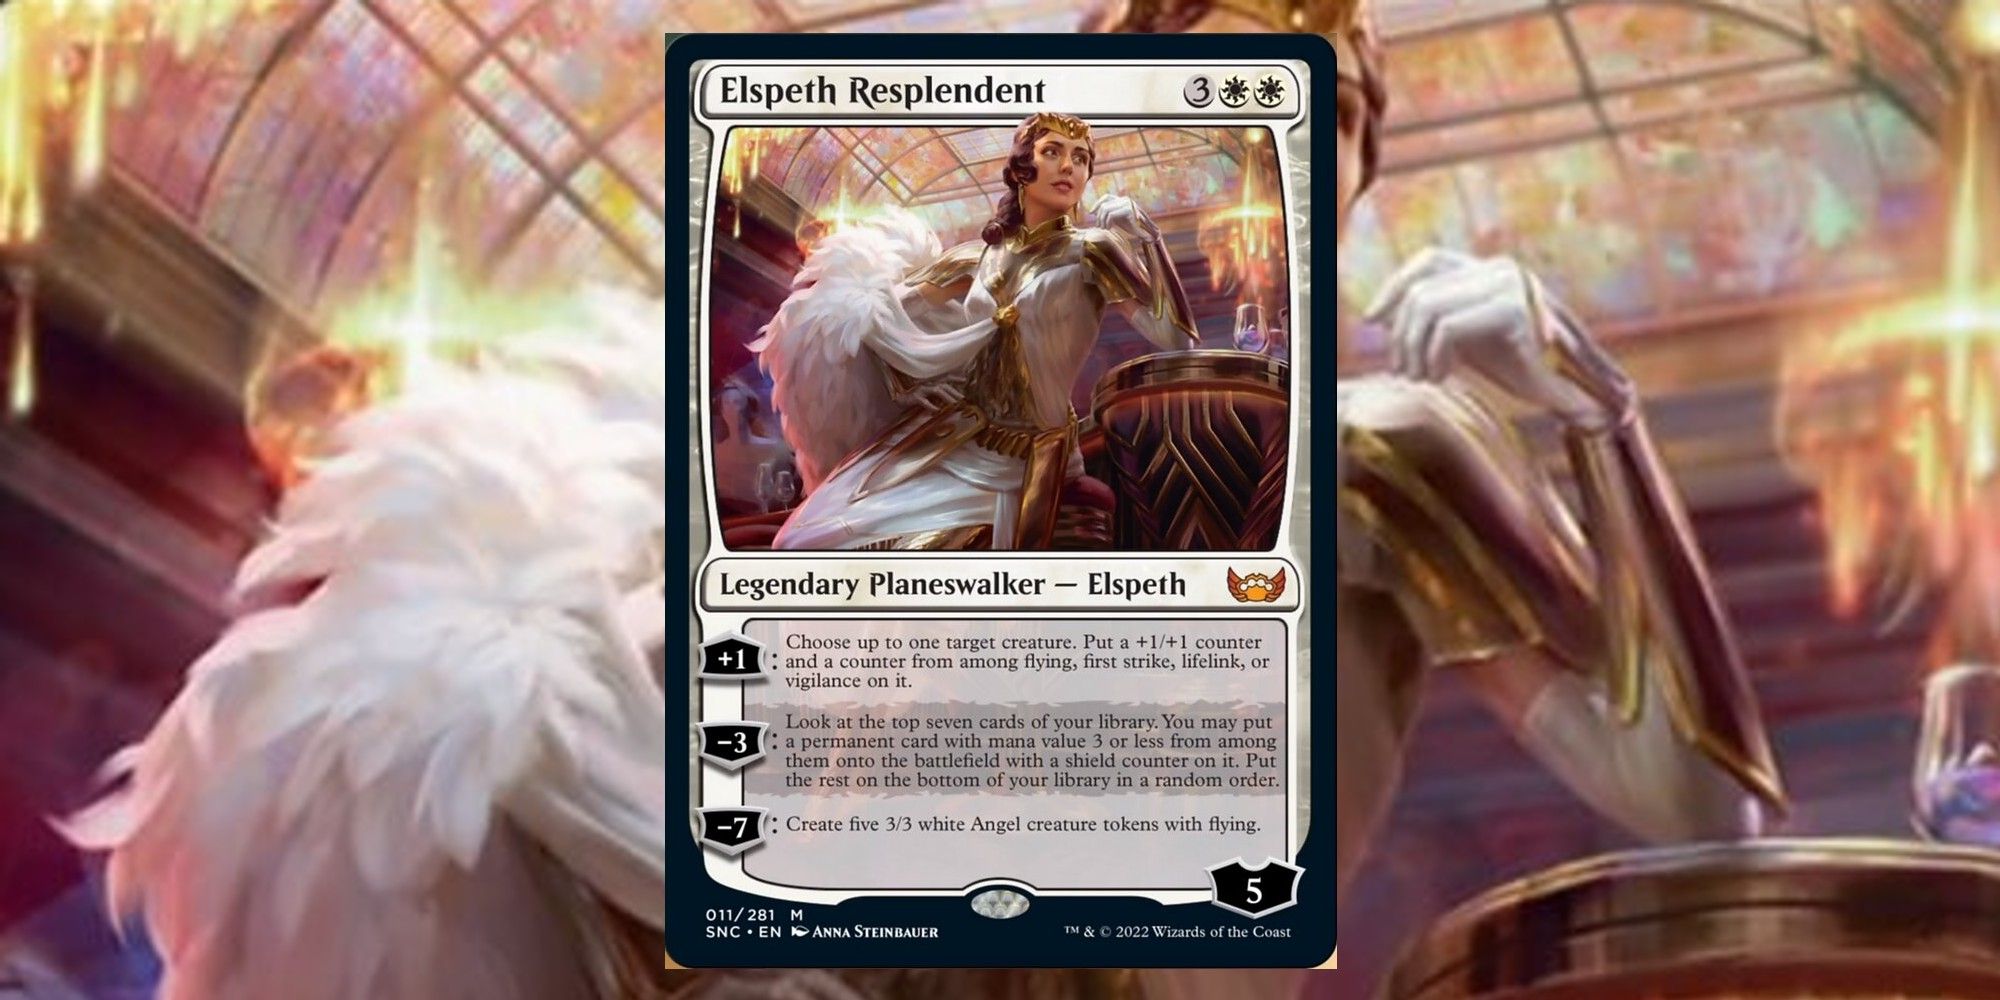 New planeswalker card Elspeth Resplendent from MTG Streets of New Capenna